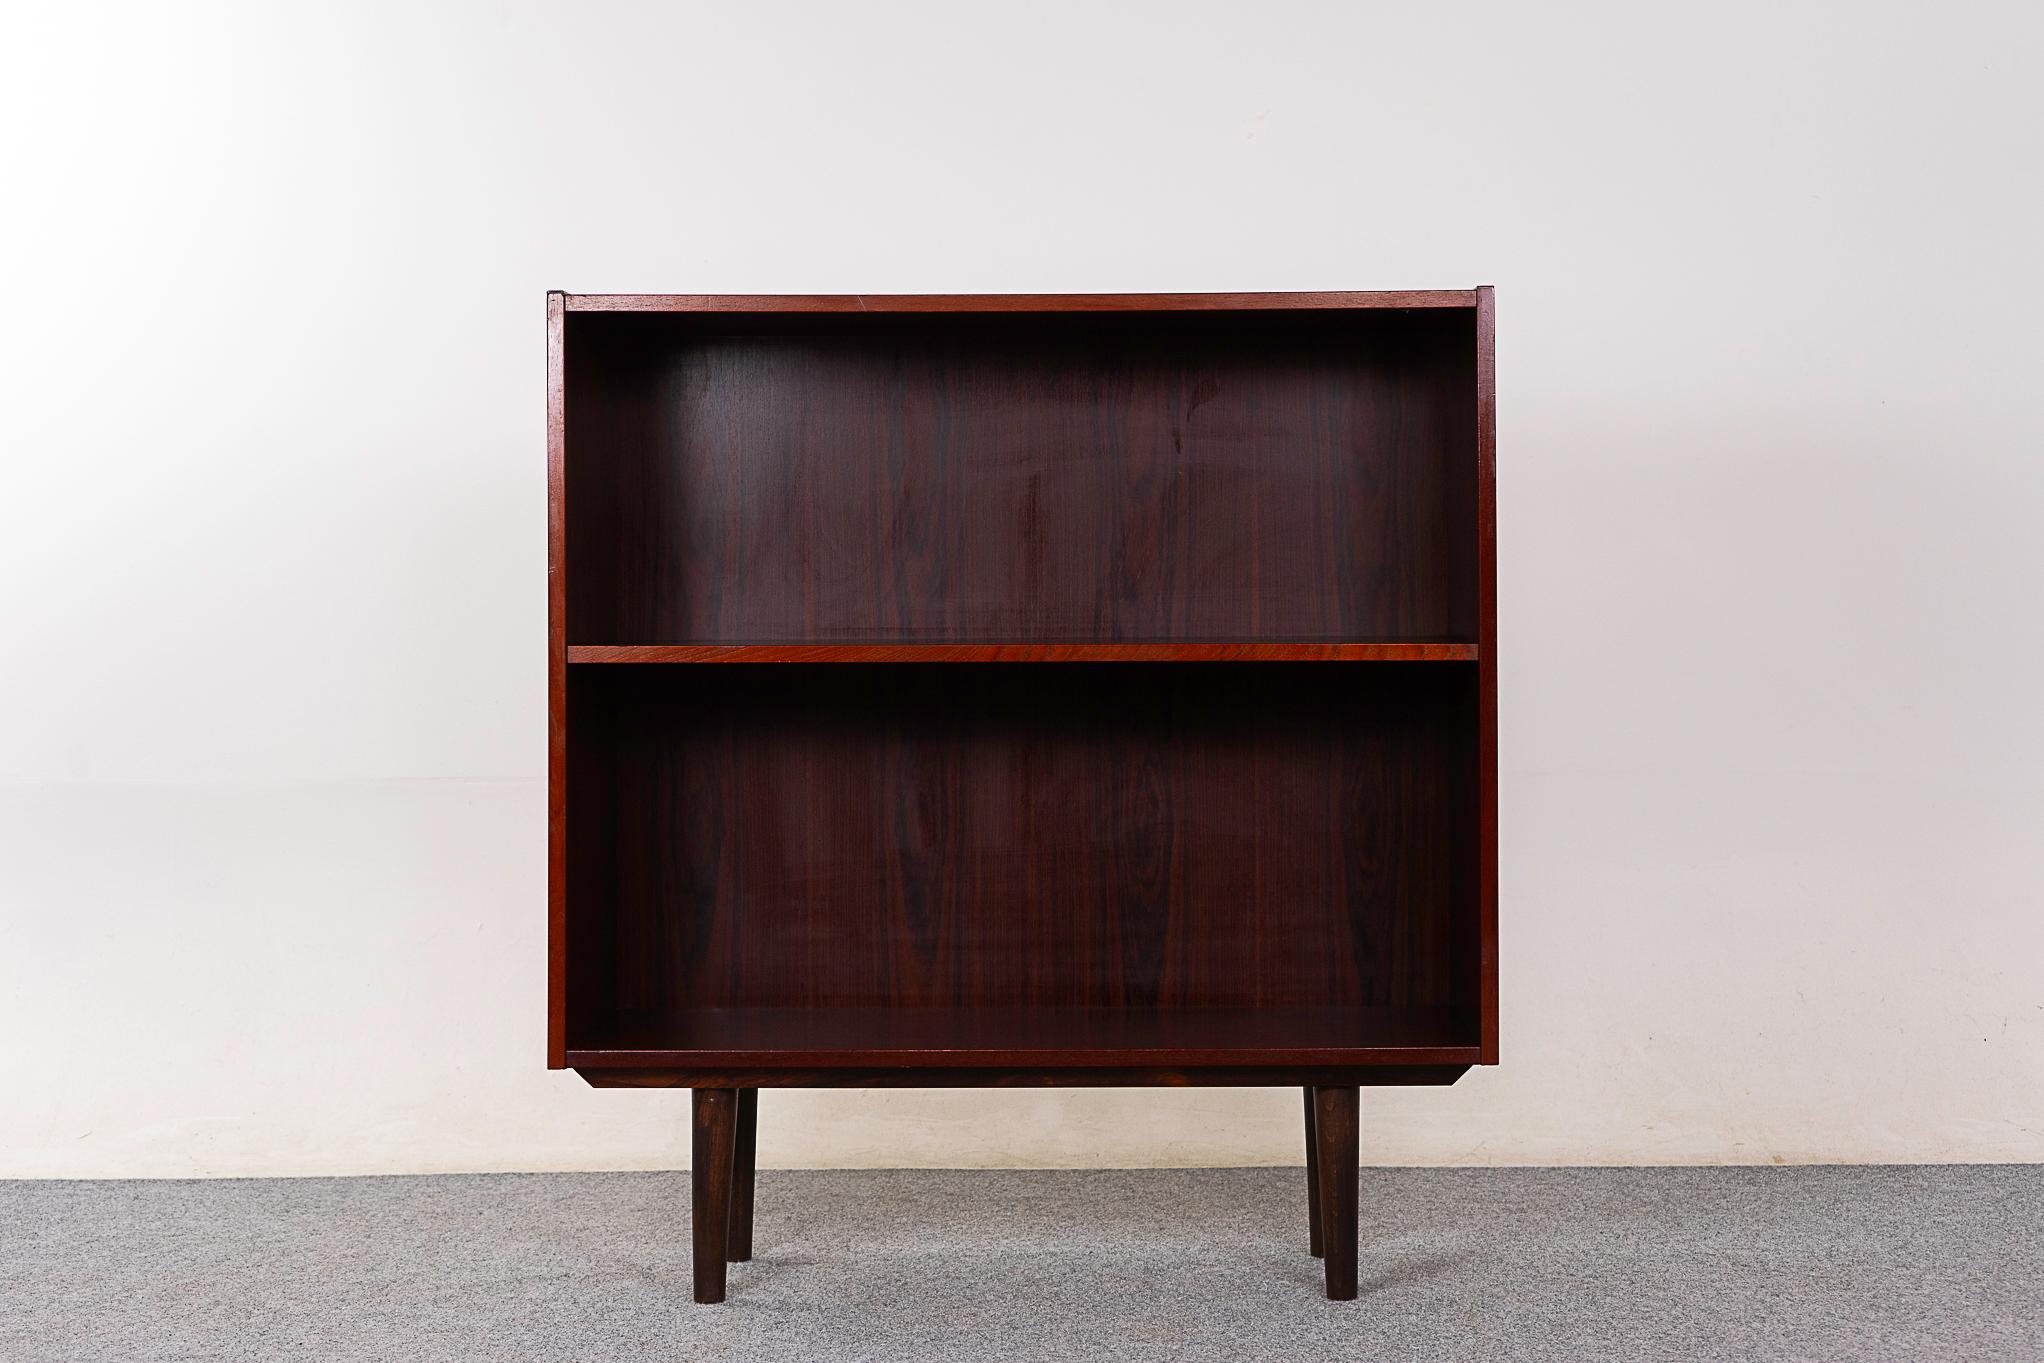 Rosewood Danish bookcase, circa 1960's. Lovely graining, height adjustable shelf with 5 hanging options. Removable tapered legs. Nice as is condition!

Unrestored item with option to purchase in restored condition for an additional $150 USD.